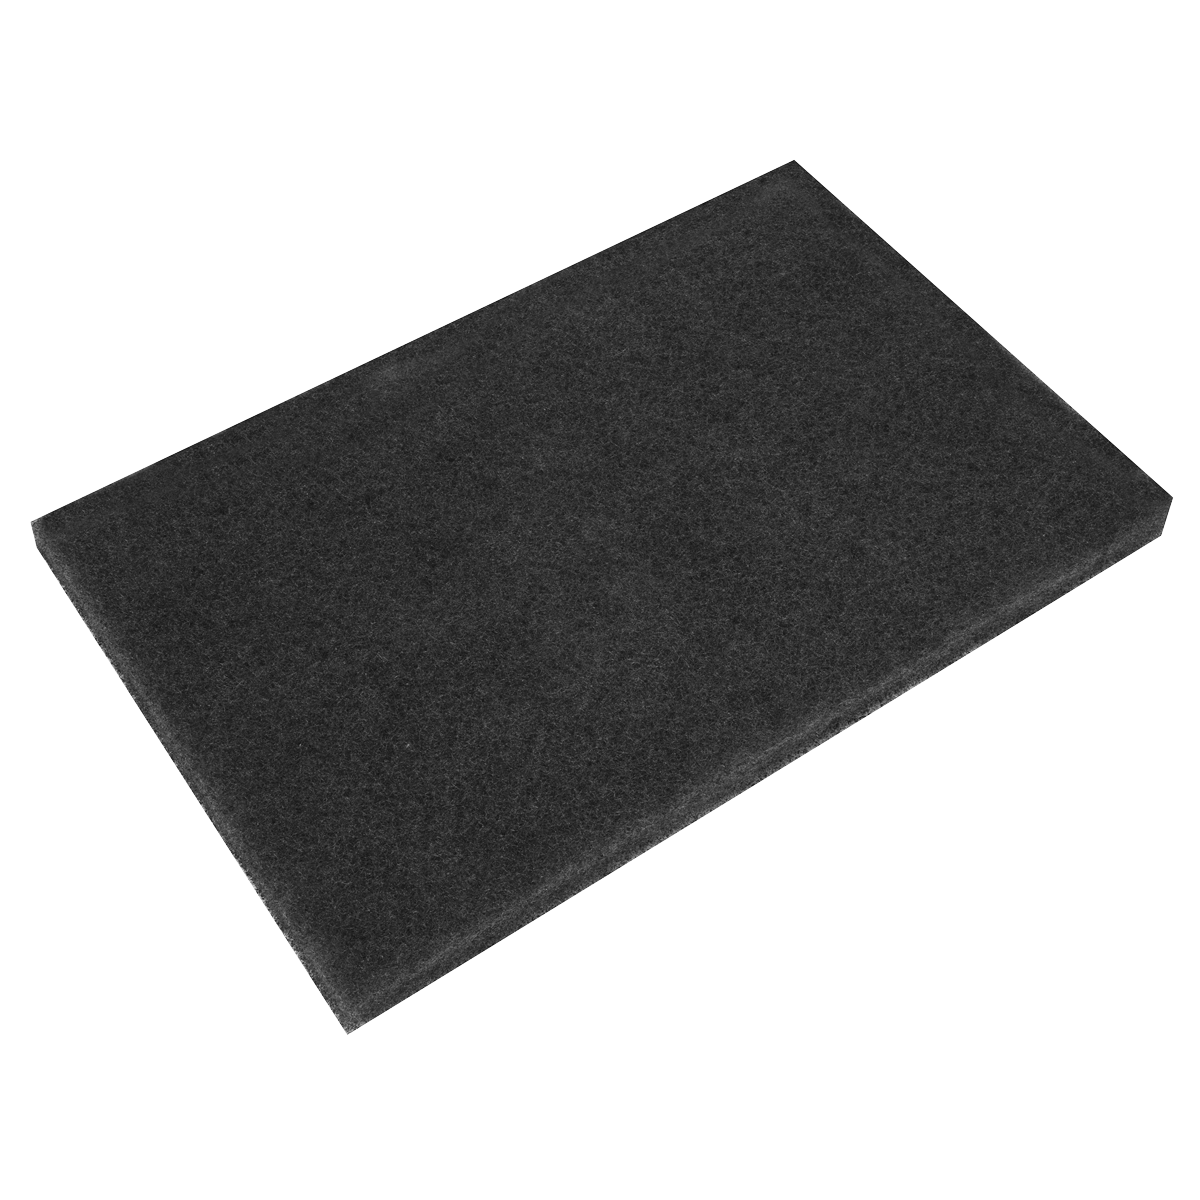 Black Stripping Pads 12 x 18 x 1" - Pack of 5 - BSP1218 - Farming Parts